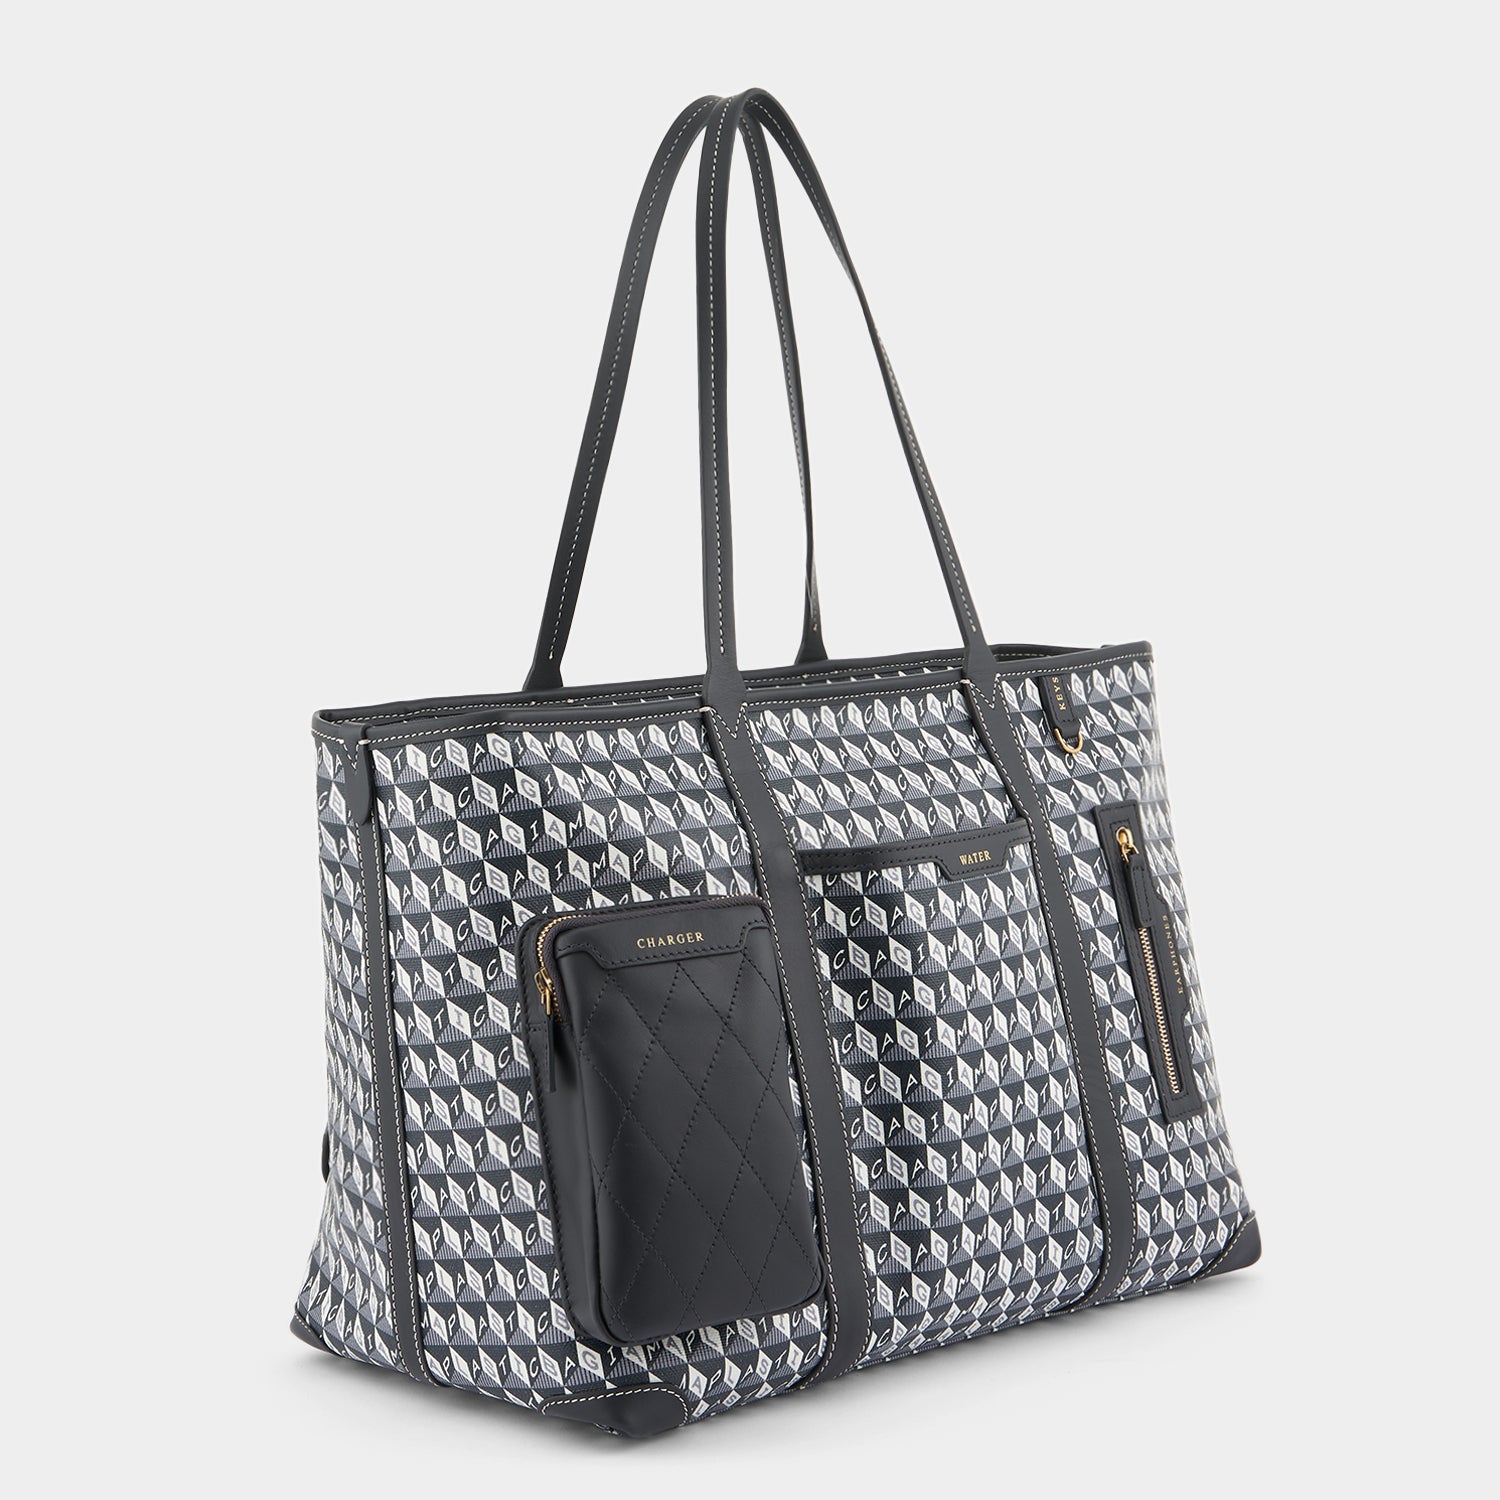 「I AM A Plastic Bag」 インフライト トート -

                  
                    Recycled Coated Canvas in Charcoal -
                  

                  Anya Hindmarch JP
